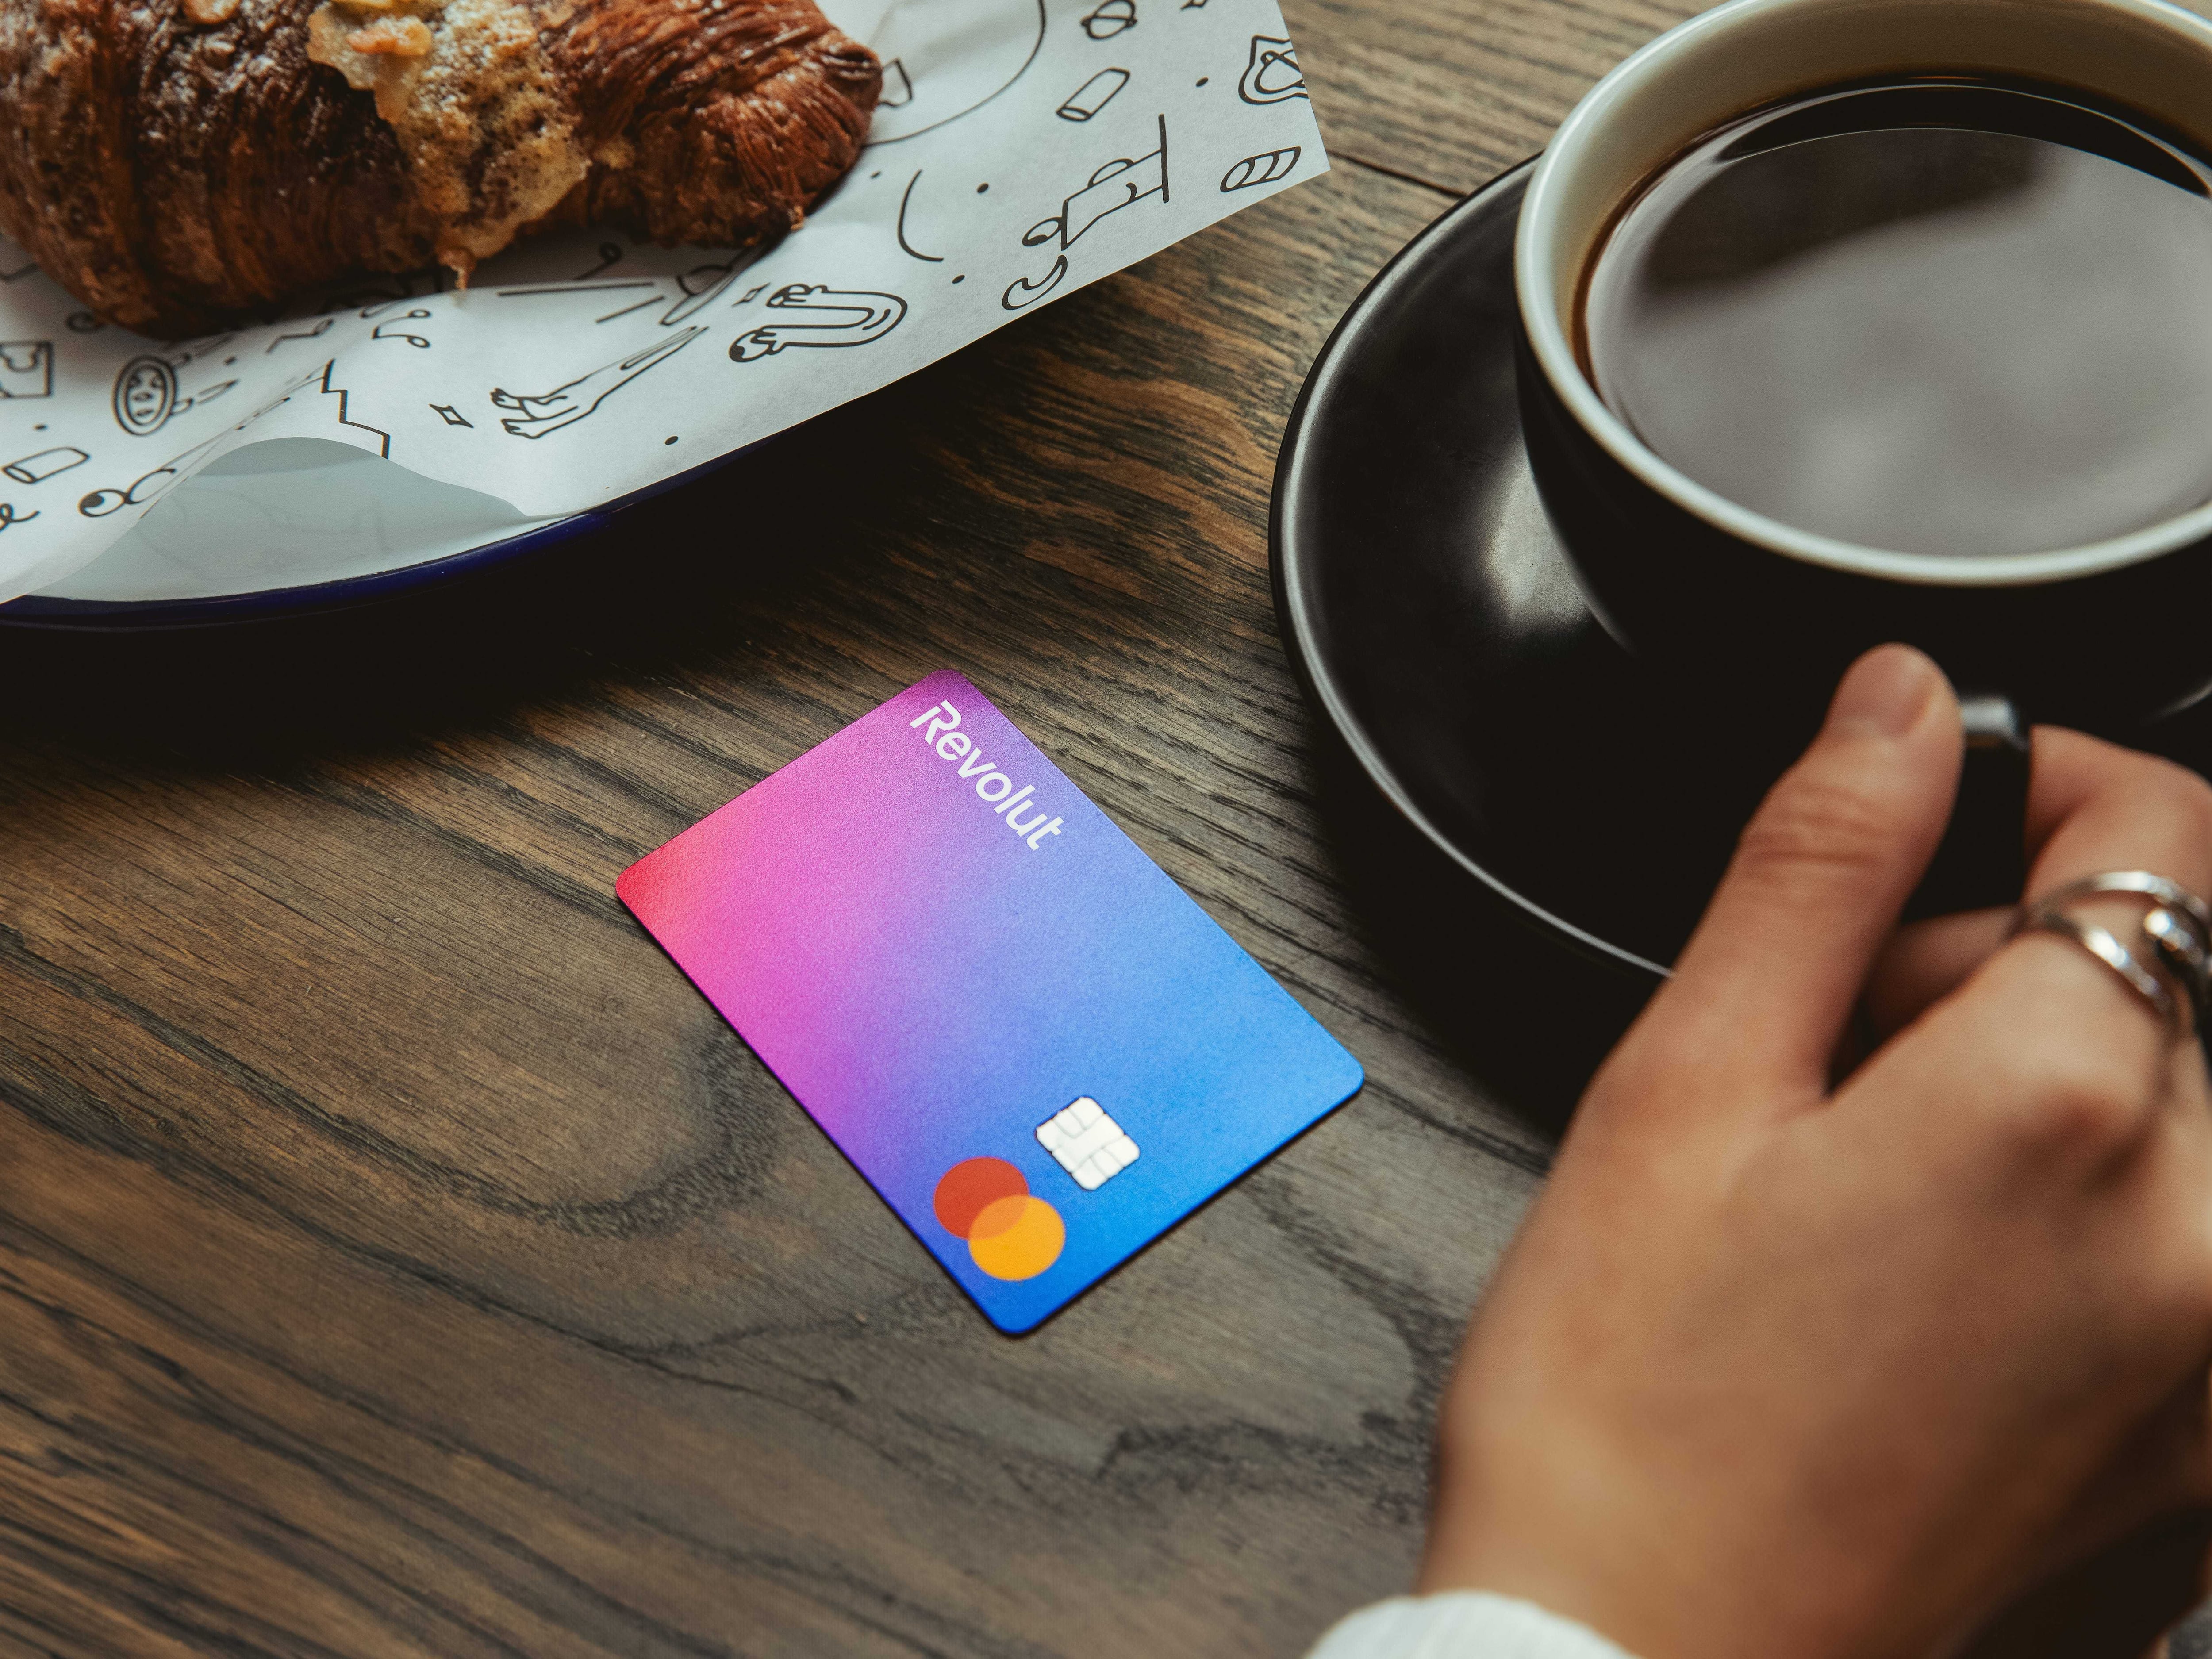 Revolut secures UK banking licence after three-year wait